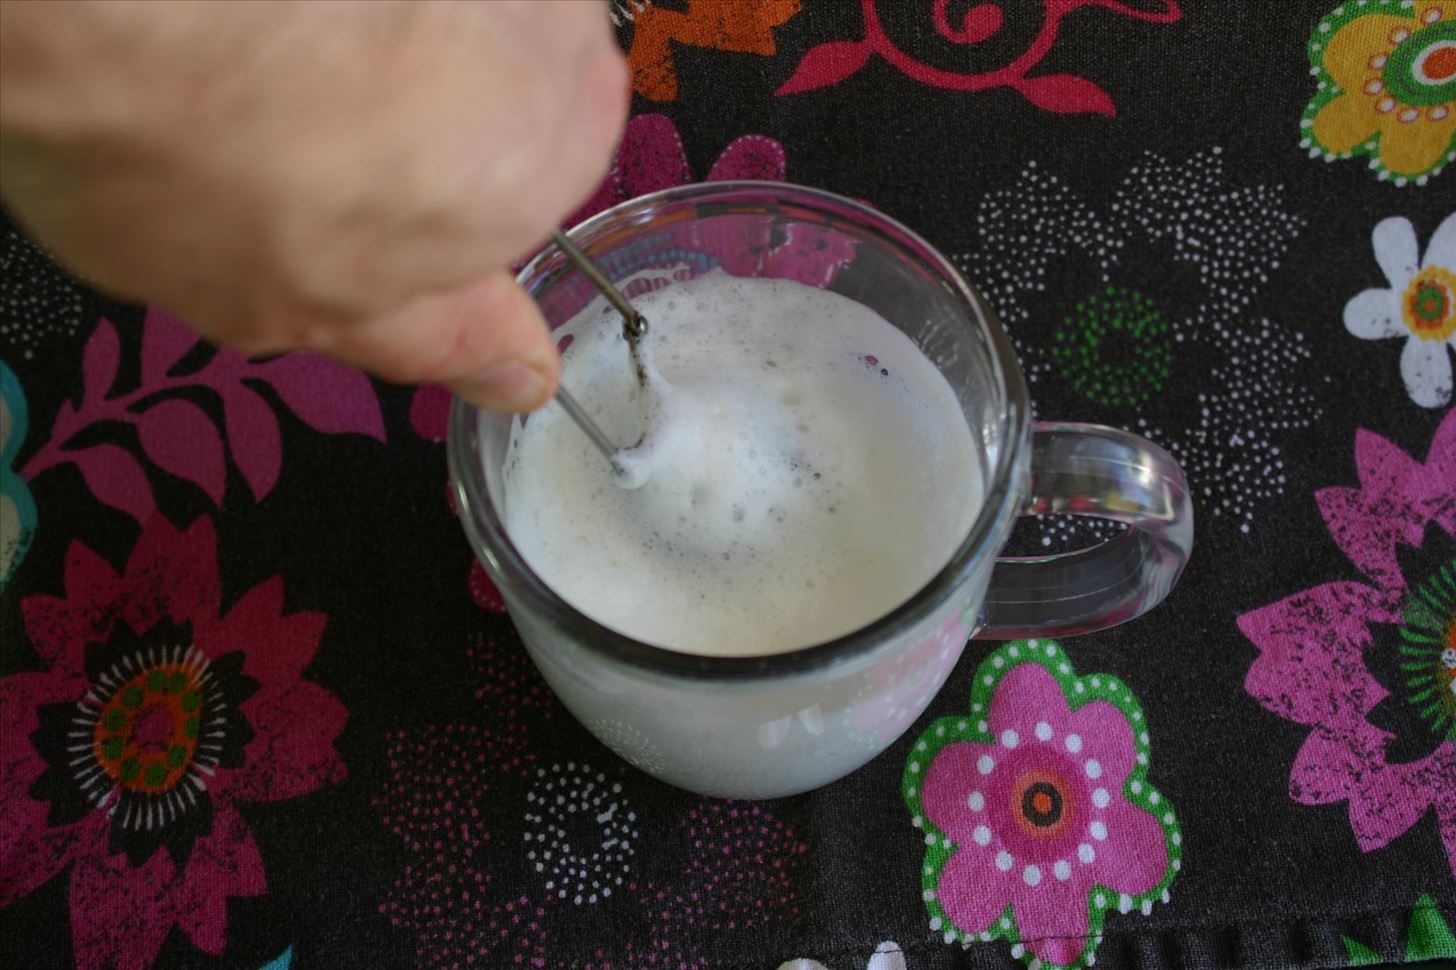 The Science of Frothing: How to Make Your Own Milk Foam